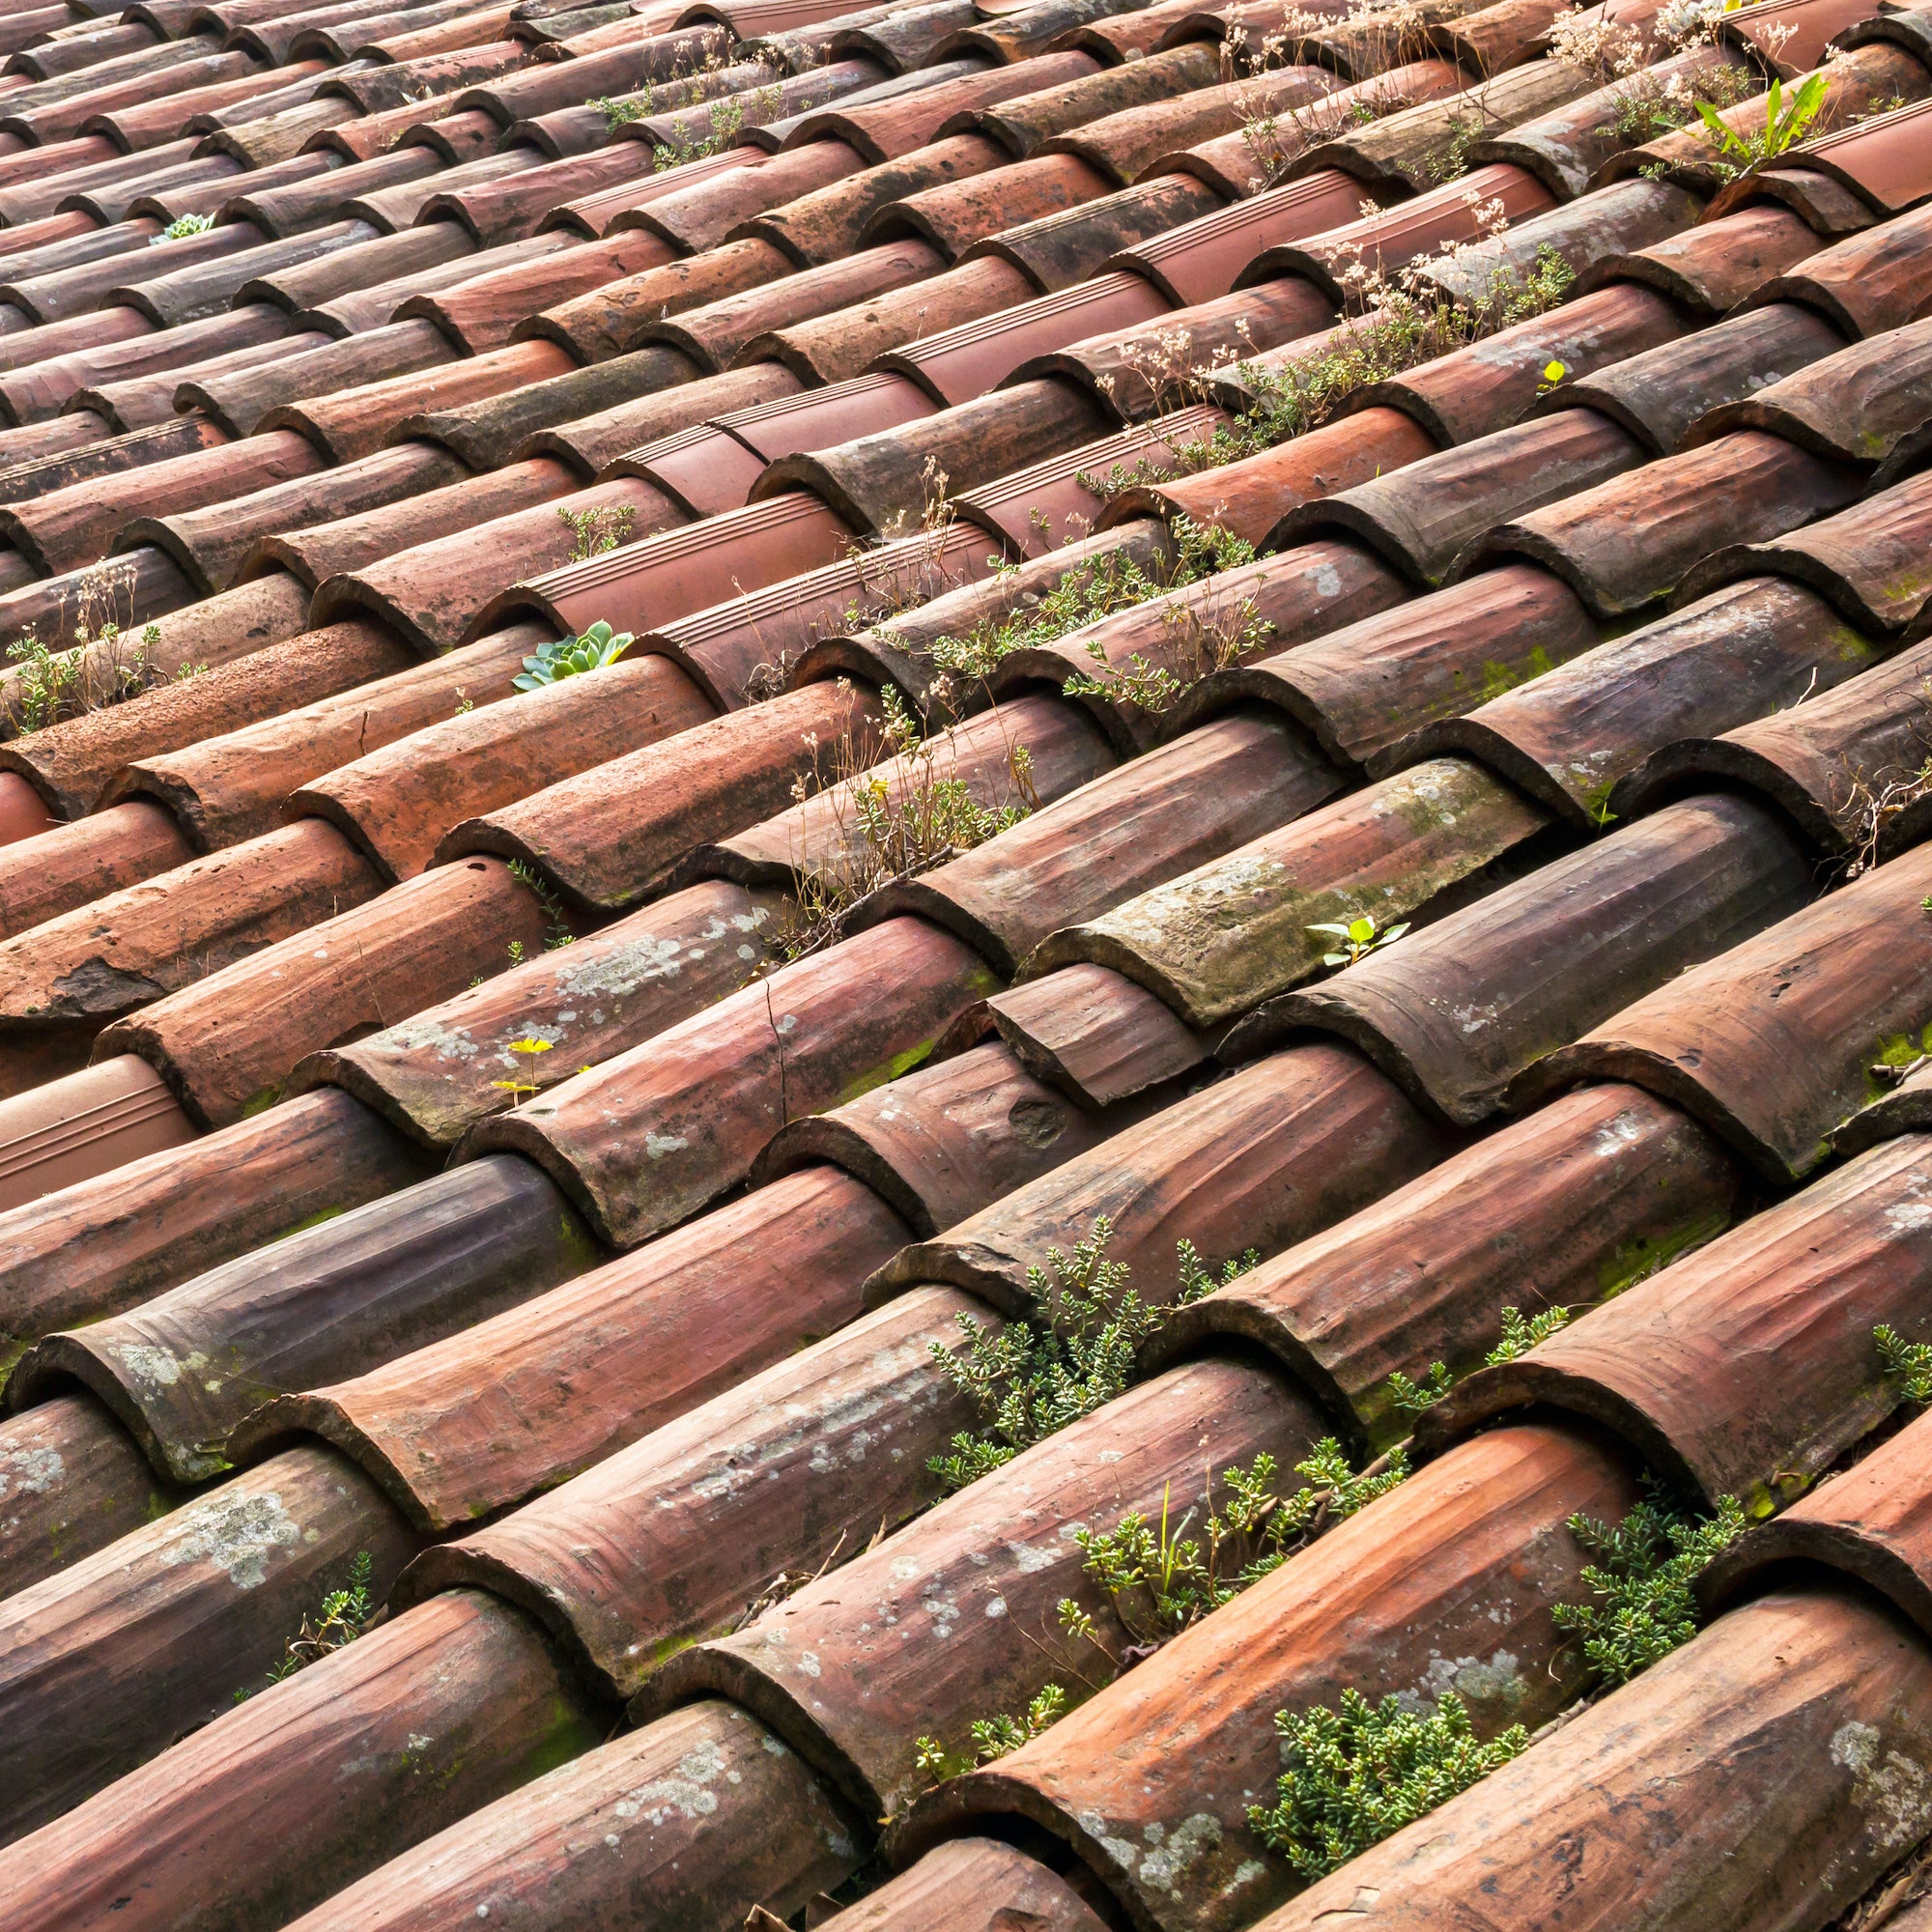 Old roofing tiles